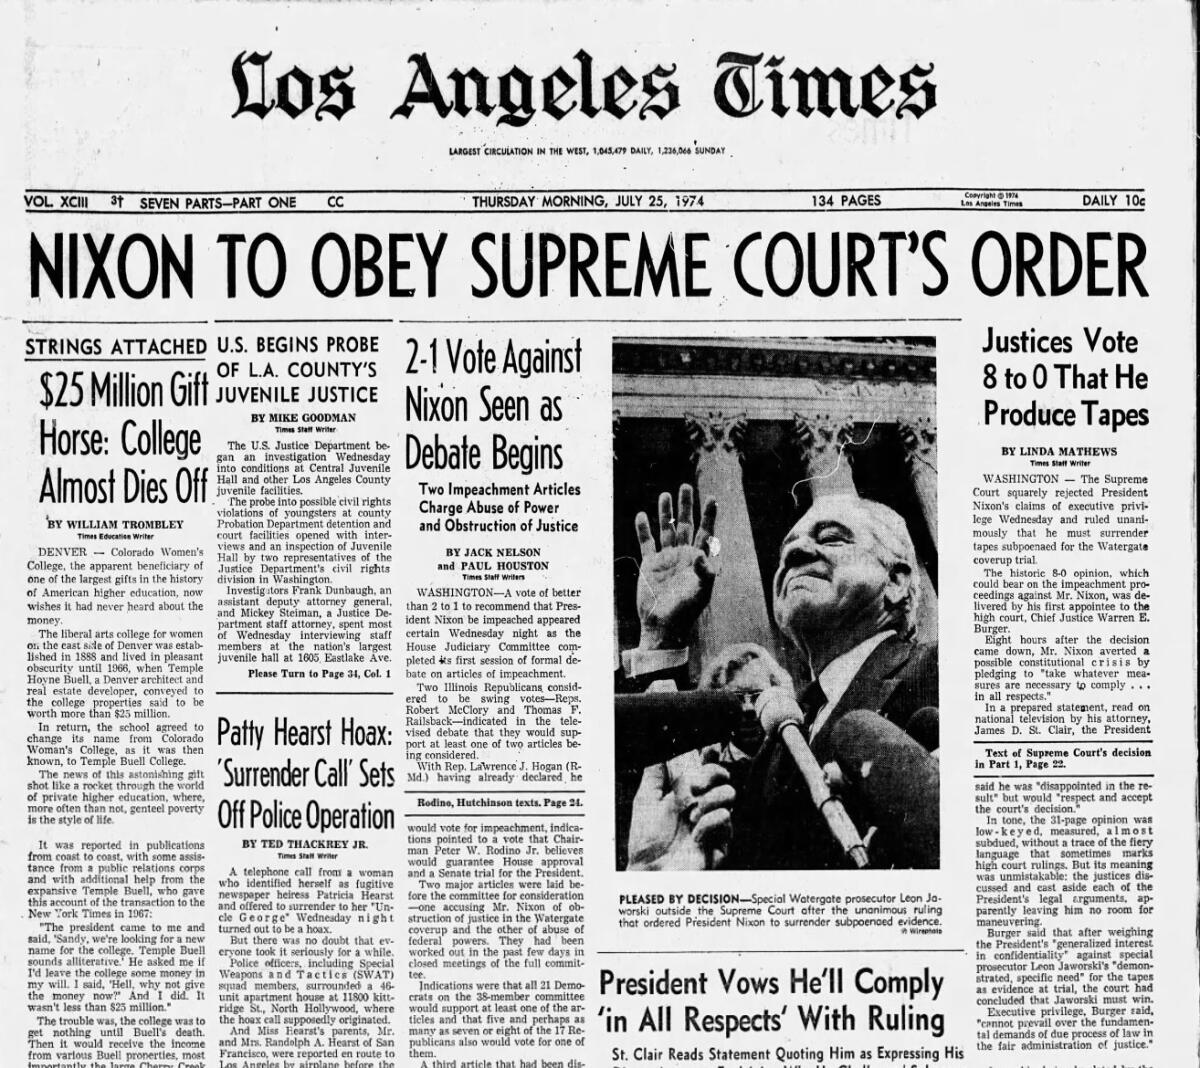 Front page of the July 25, 1974 L.A. Times